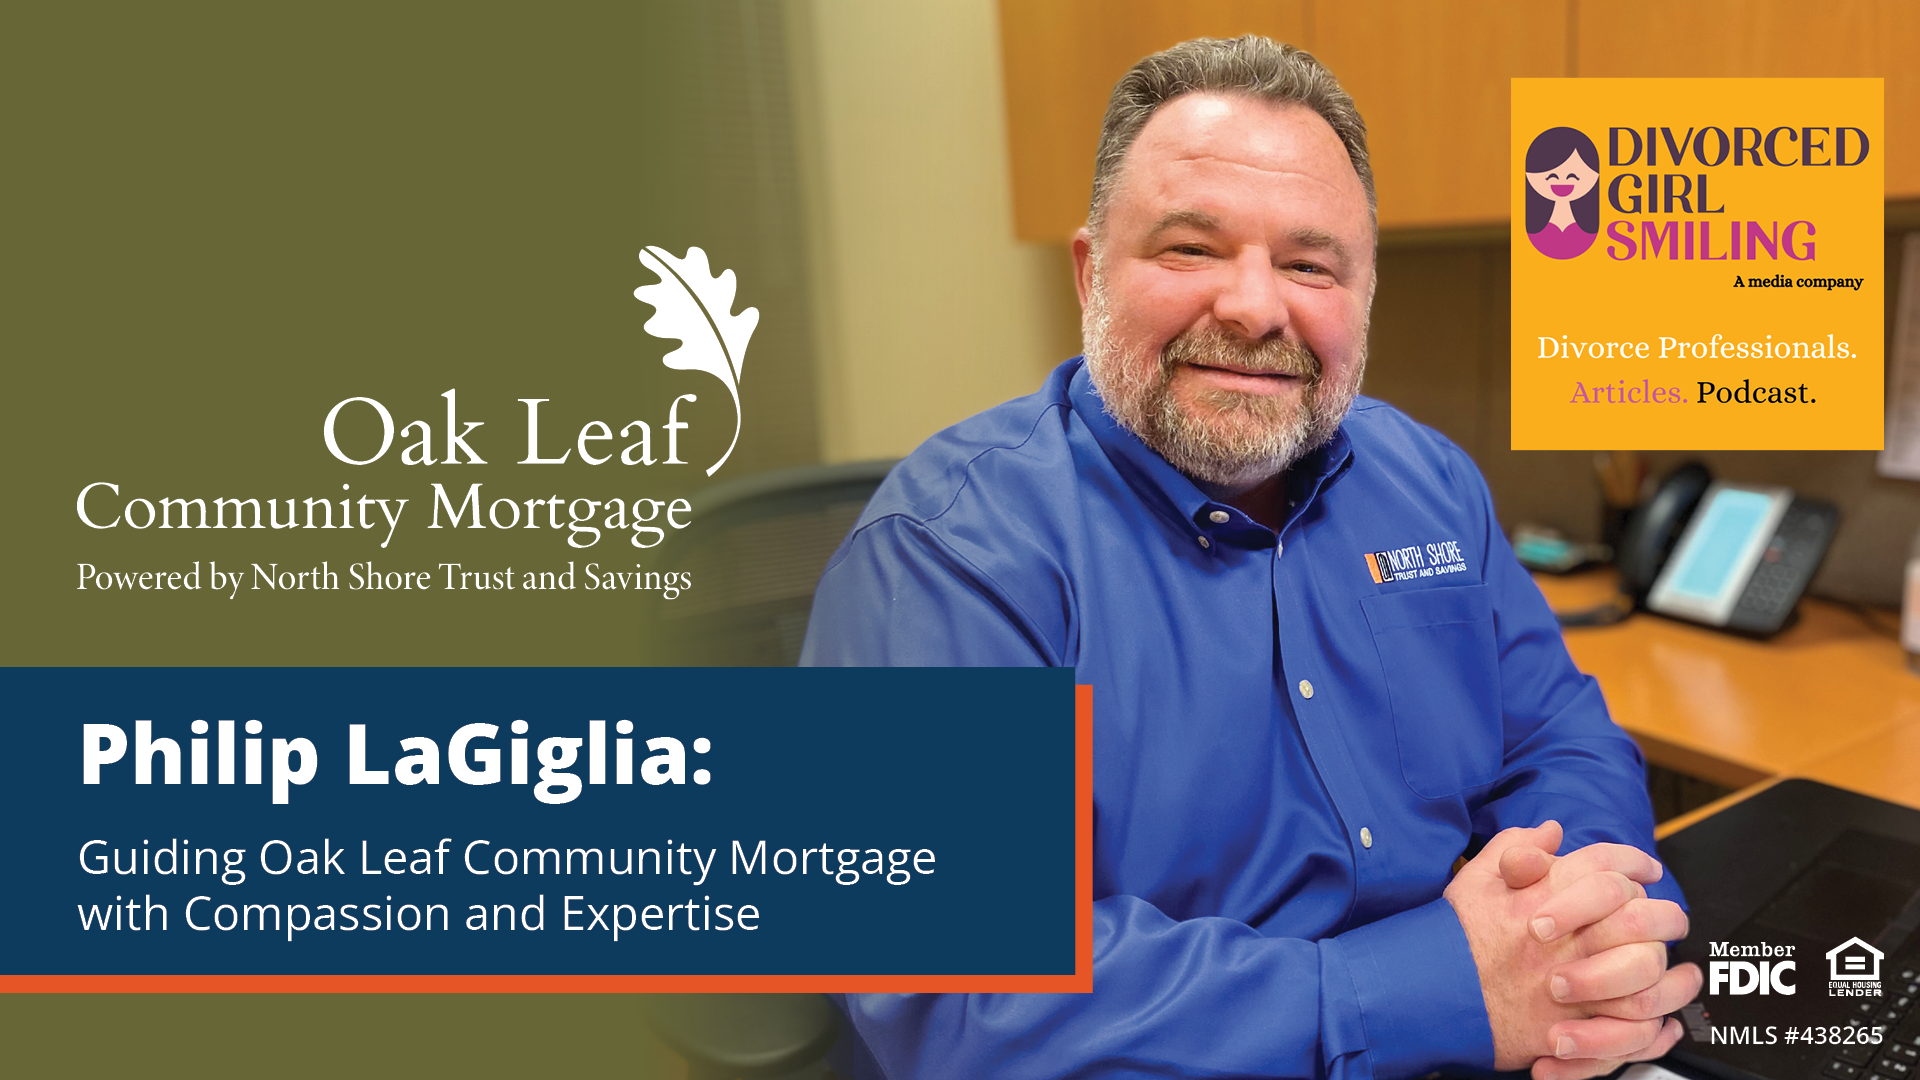 Philip LaGiglia: Guiding Oak Leaf Community Mortgage with Compassion and Expertise